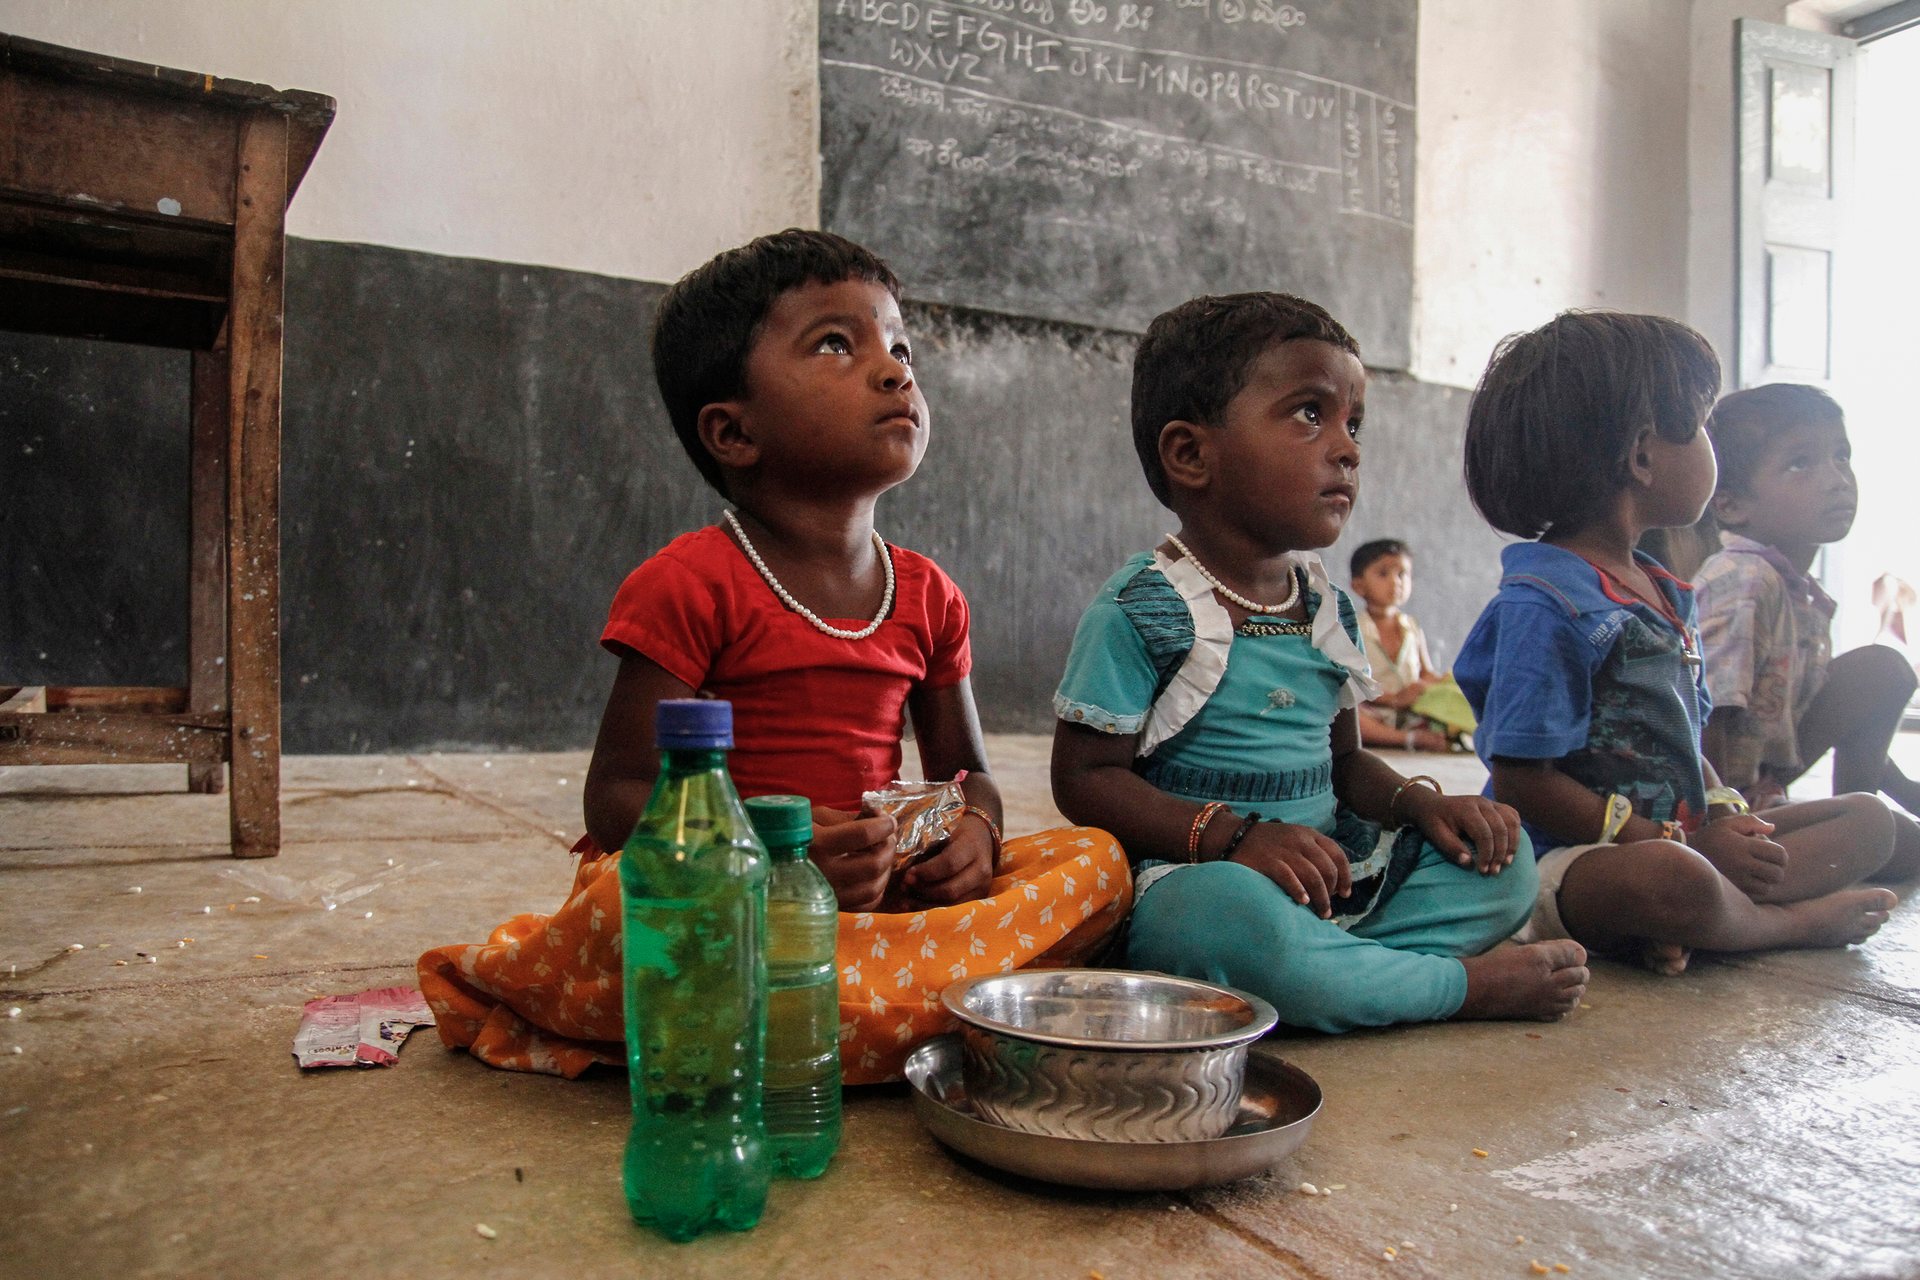 A child development centre in India, set up by the government in an effort to tackle malnutrition. Photograph: Ronny Sen/WaterAid